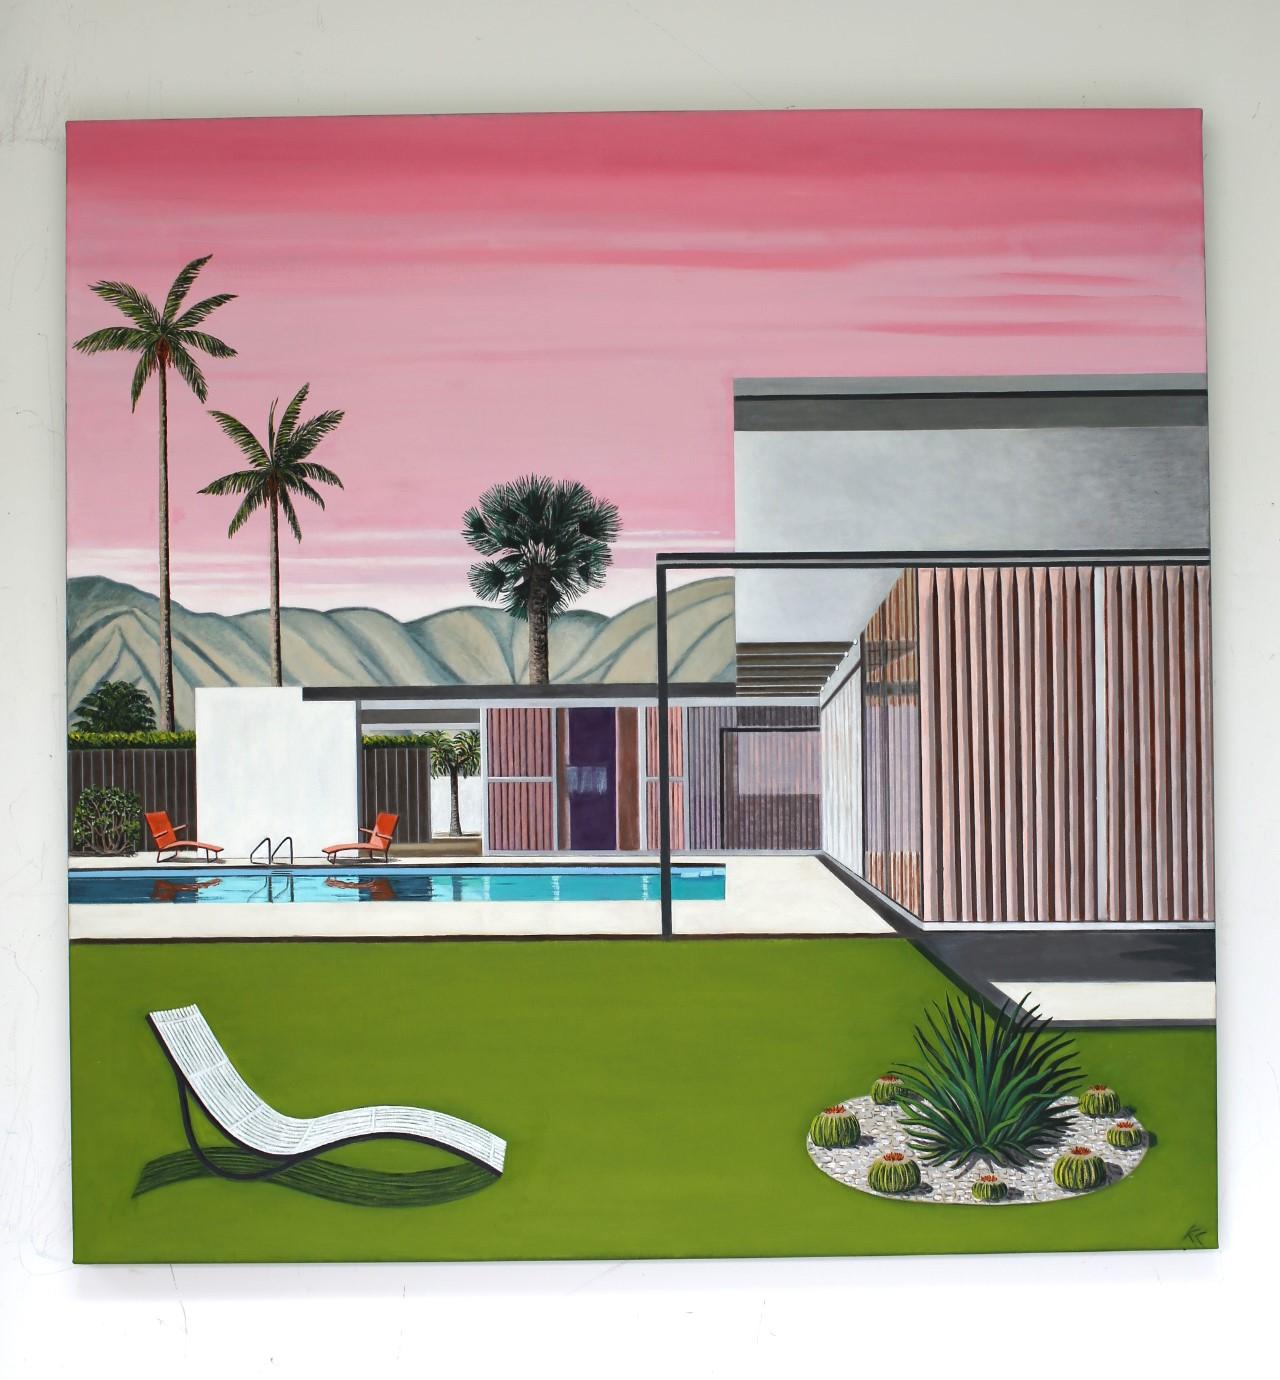 Pink Sky Neutra House, Original painting, Architect, Contemporary, Hockney style - Painting by Karen Lynn